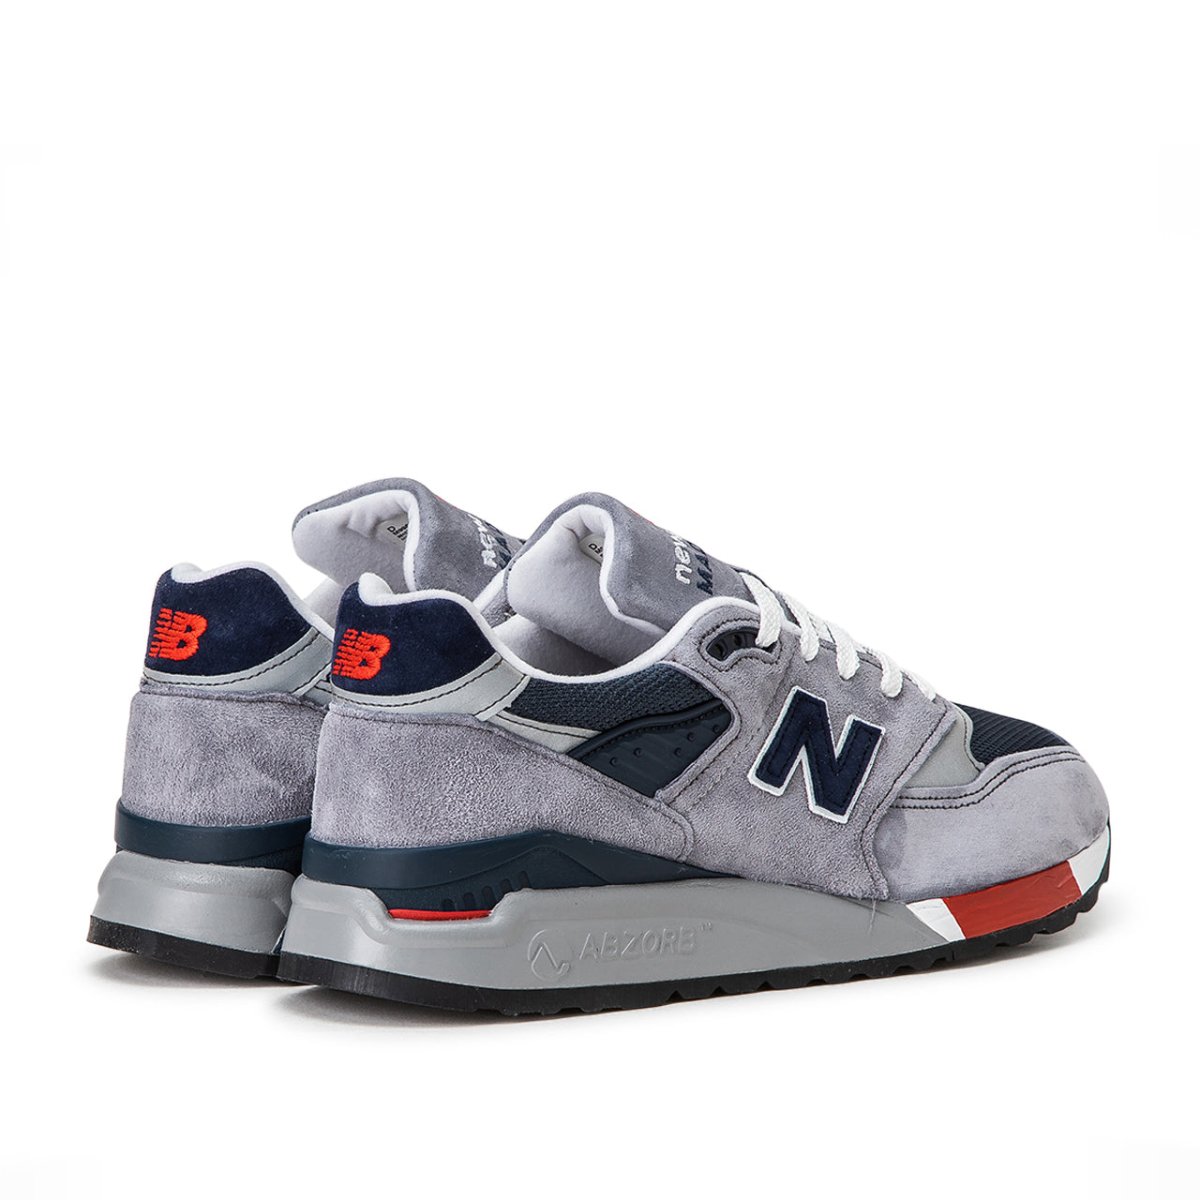 New Balance M998 GNR 'Made in USA' (Grau / Navy)  - Allike Store